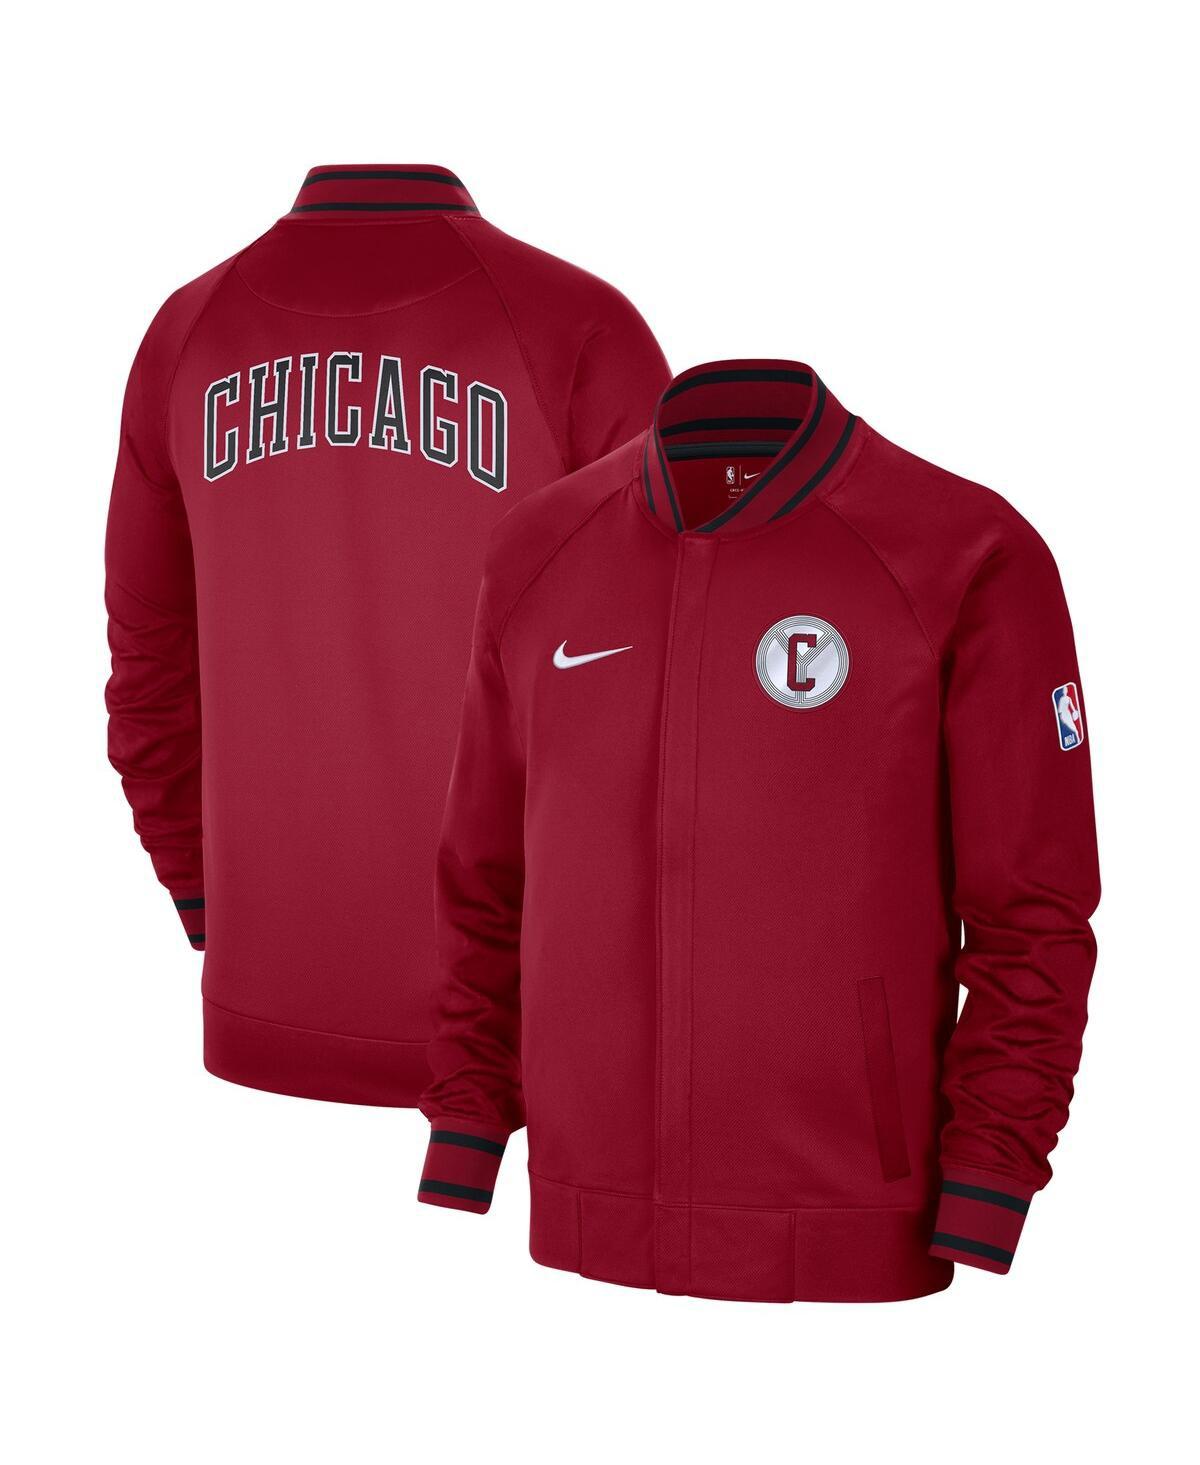 Men's Nike Red Chicago Bulls Authentic Showtime Performance Full-Zip Hoodie Size: 3XL